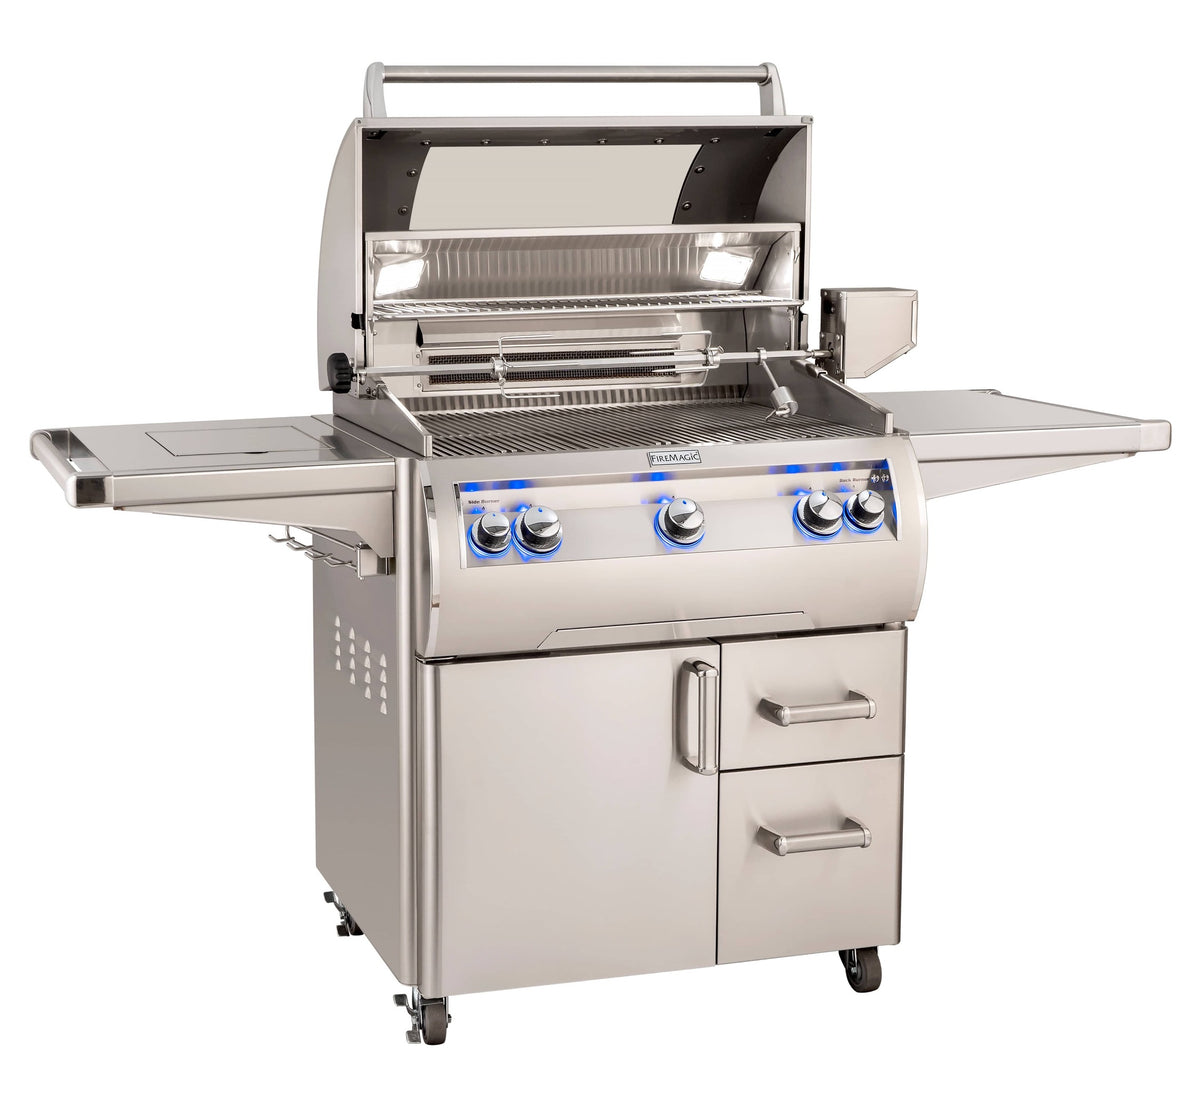 Firemagic Grills Fire Magic Echelon Diamond E660s Portable Grill with Rotisserie, Analog Thermometer and Flush Mounted Single Side Burner / E660s-9EAN(P)-62, E660s-9LAN(P)-62, E660s-9EAN(P)-62-W, E660s-9LAN(P)-62-W